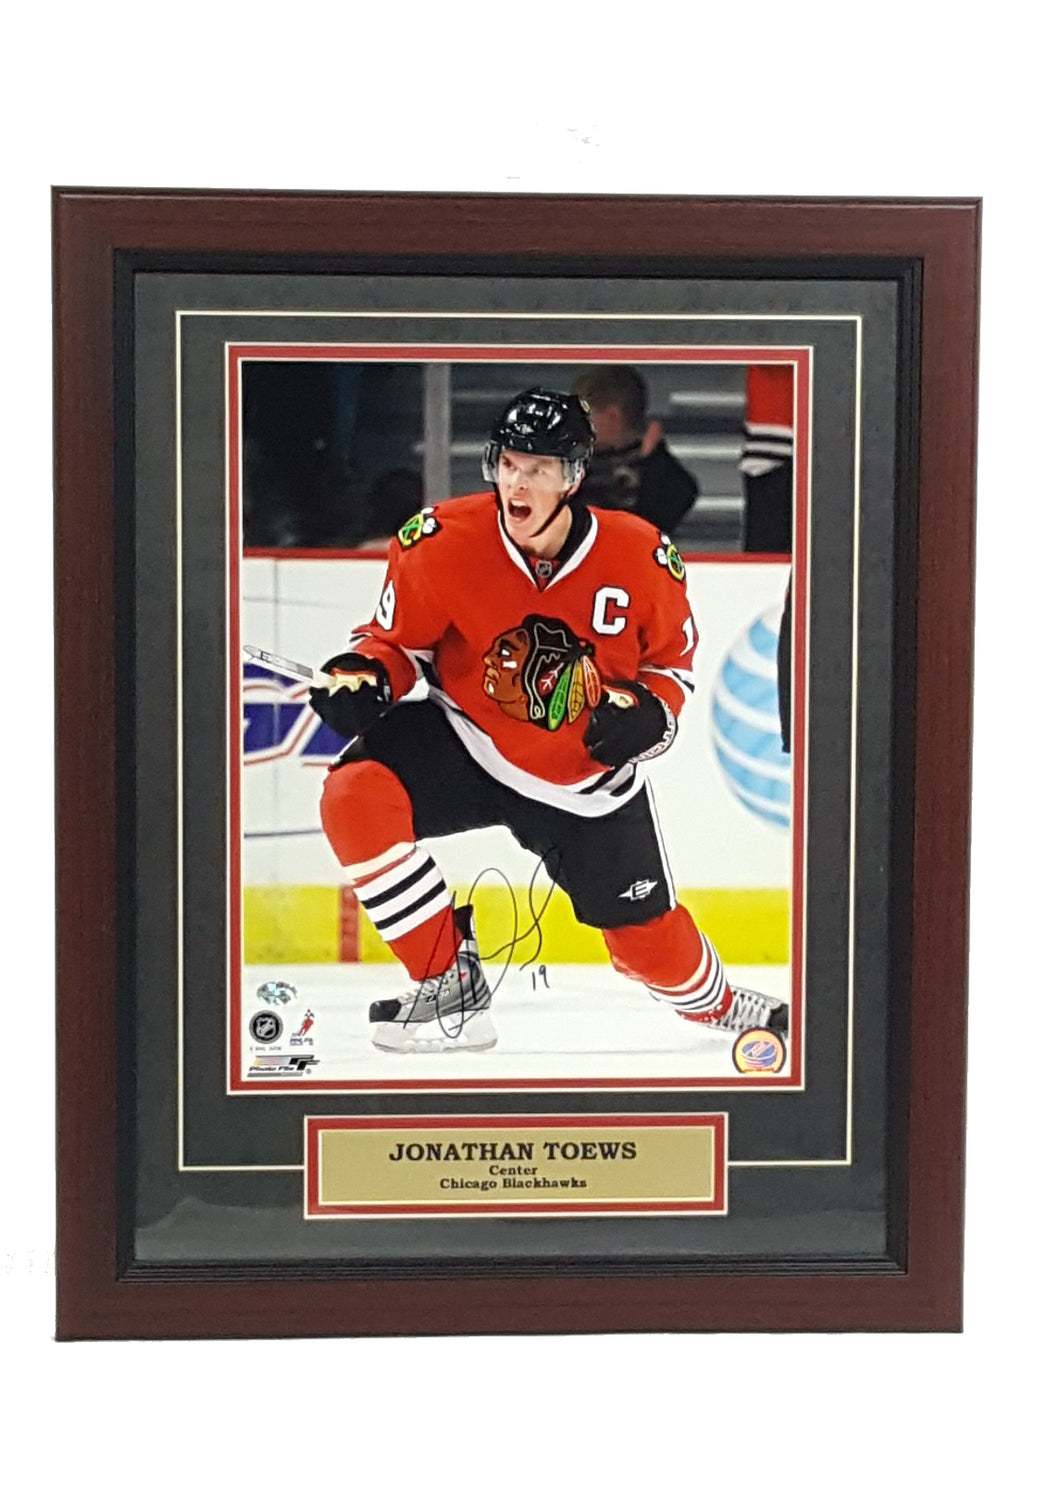 Jonathan Toews Signed Autographed 8x10 Framed